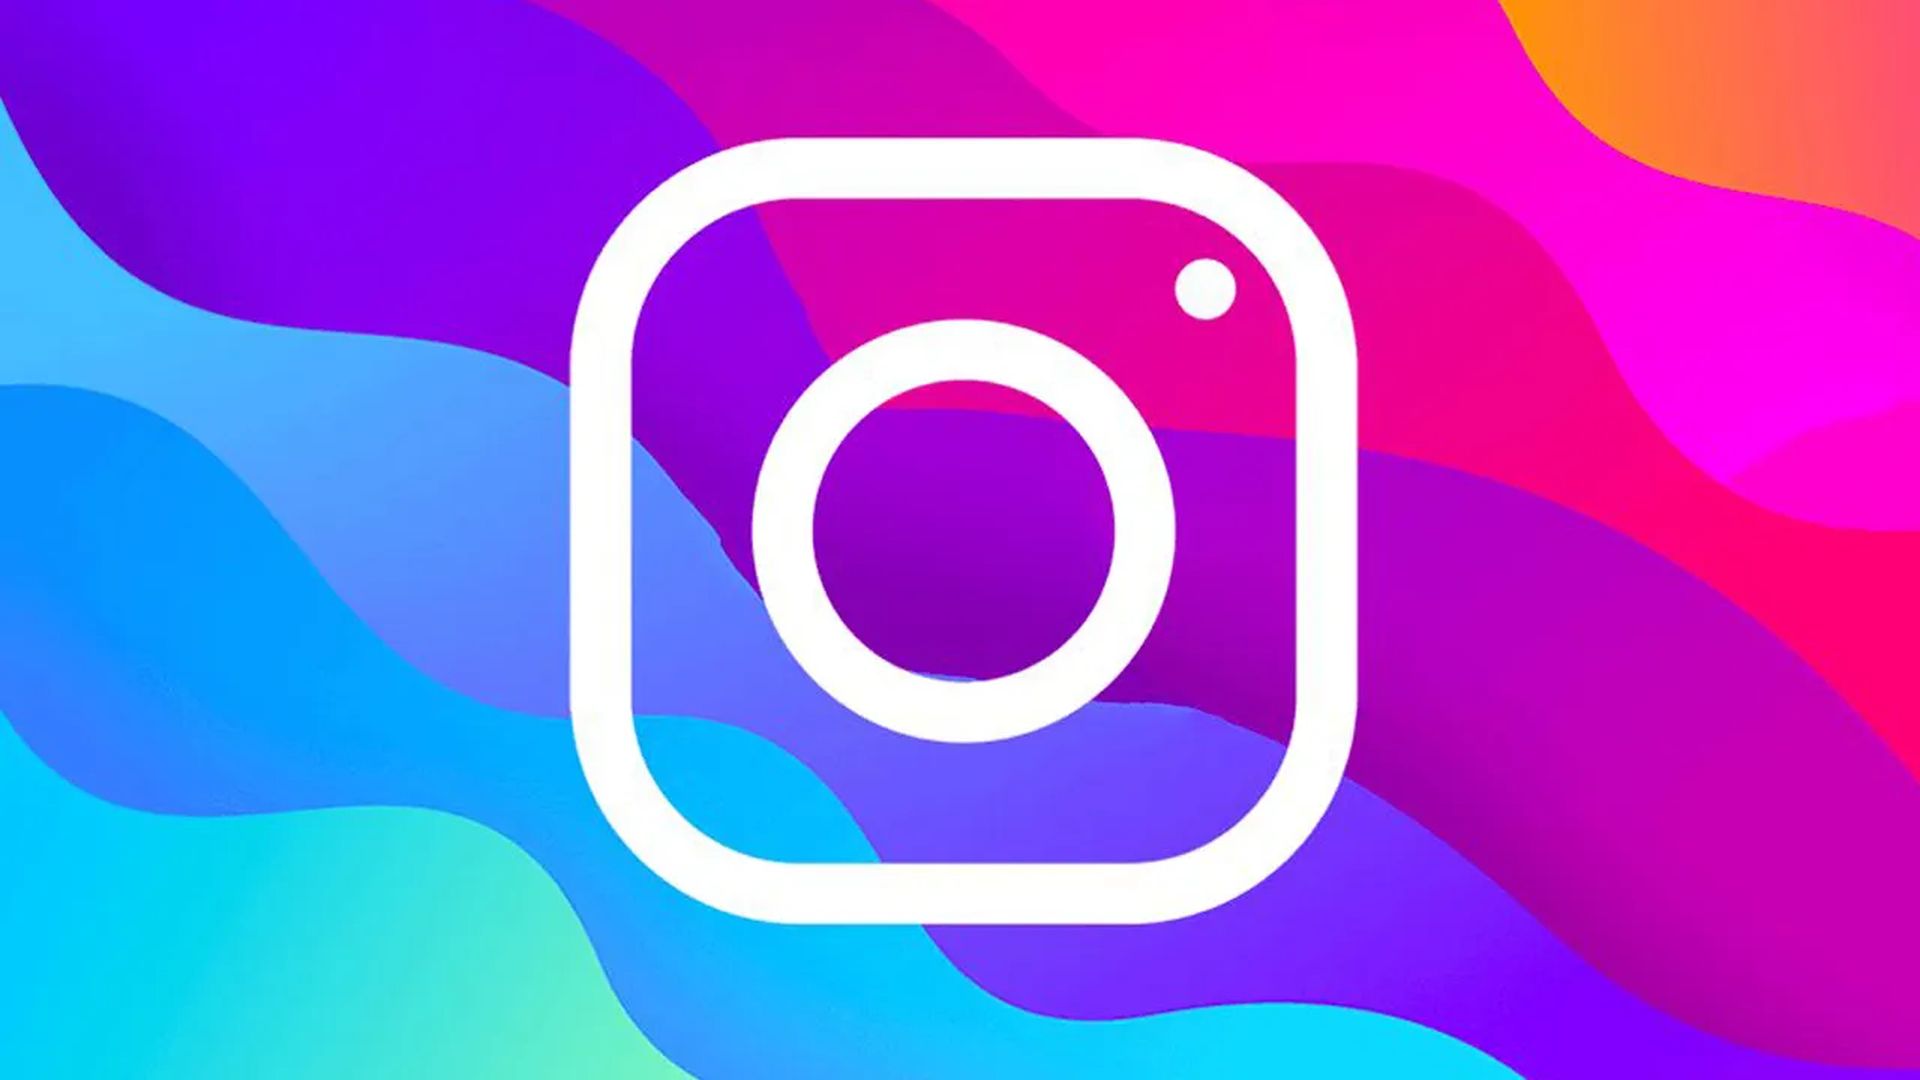 In this article, we are going to be going over how to post GIF on Instagram, so you can share your favorite GIFs with your followers.